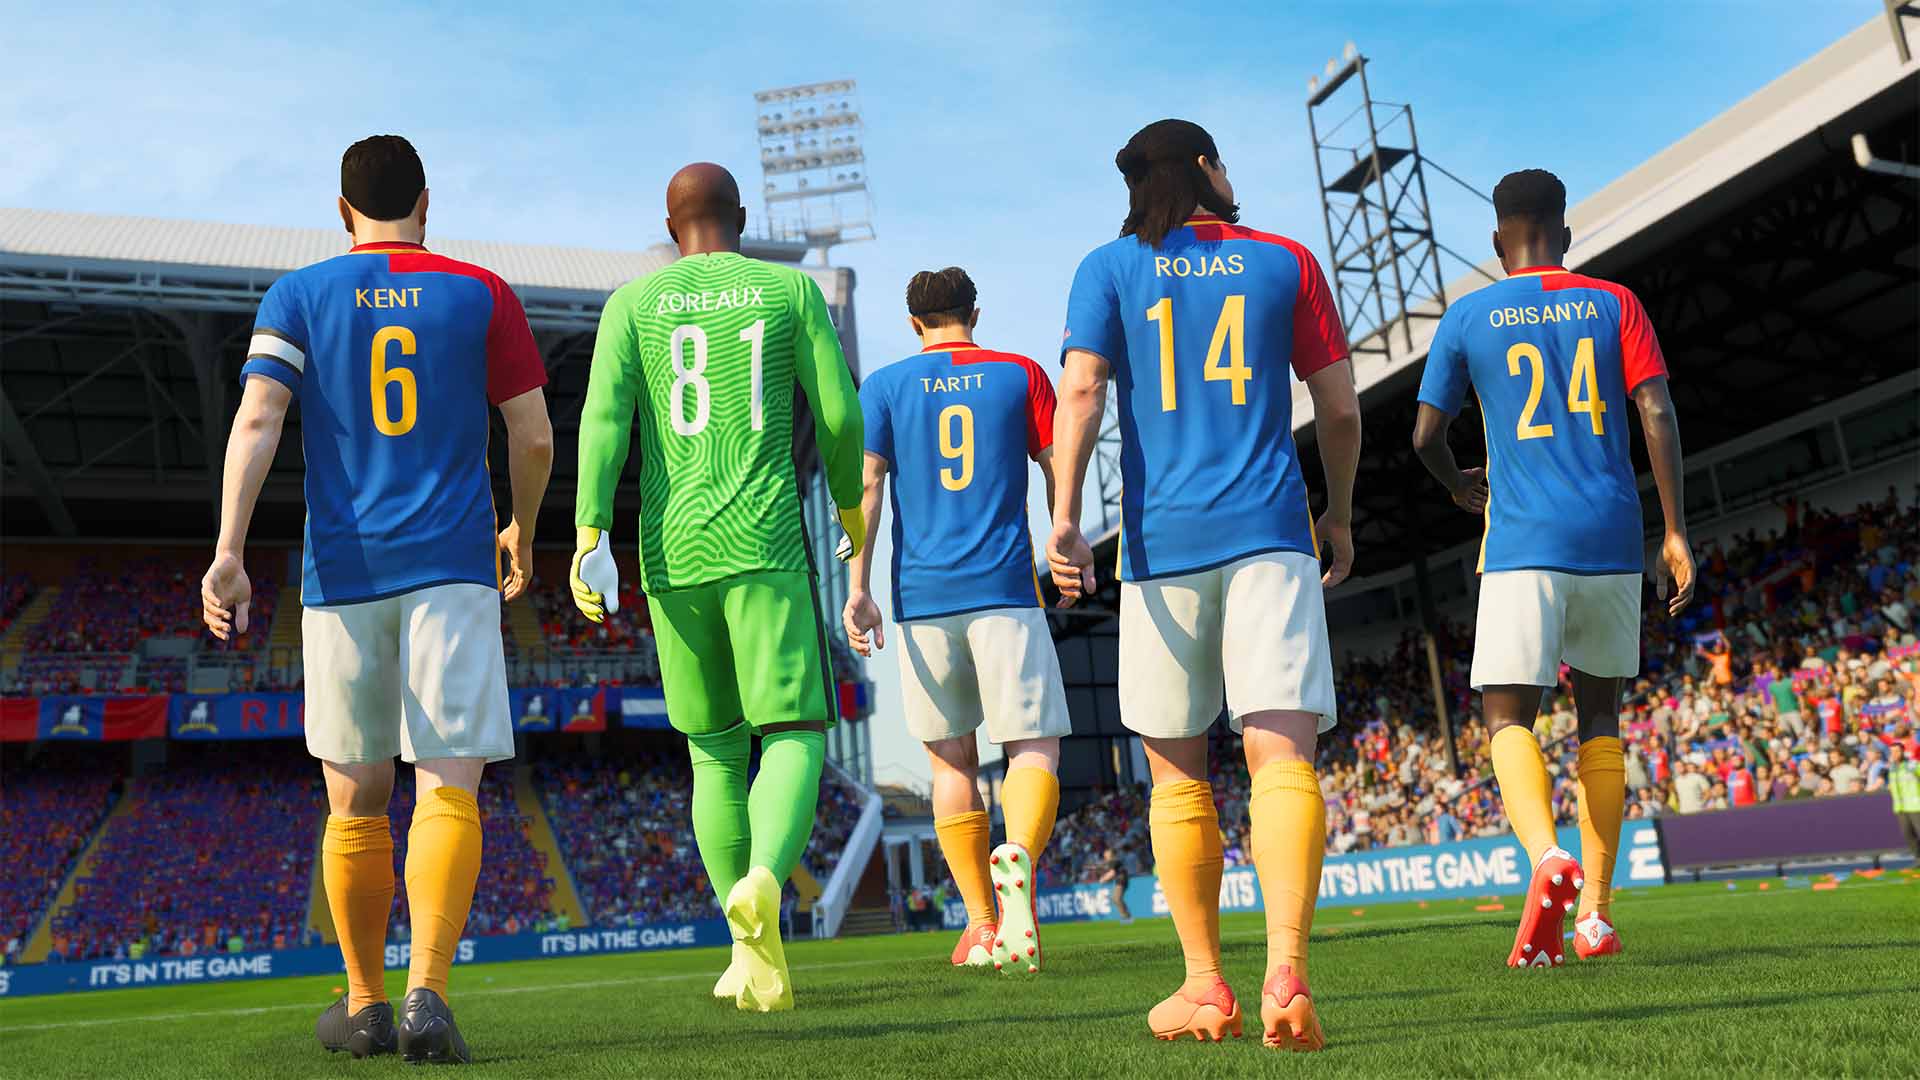 FIFA 23 News, Reviews, Features and Guides